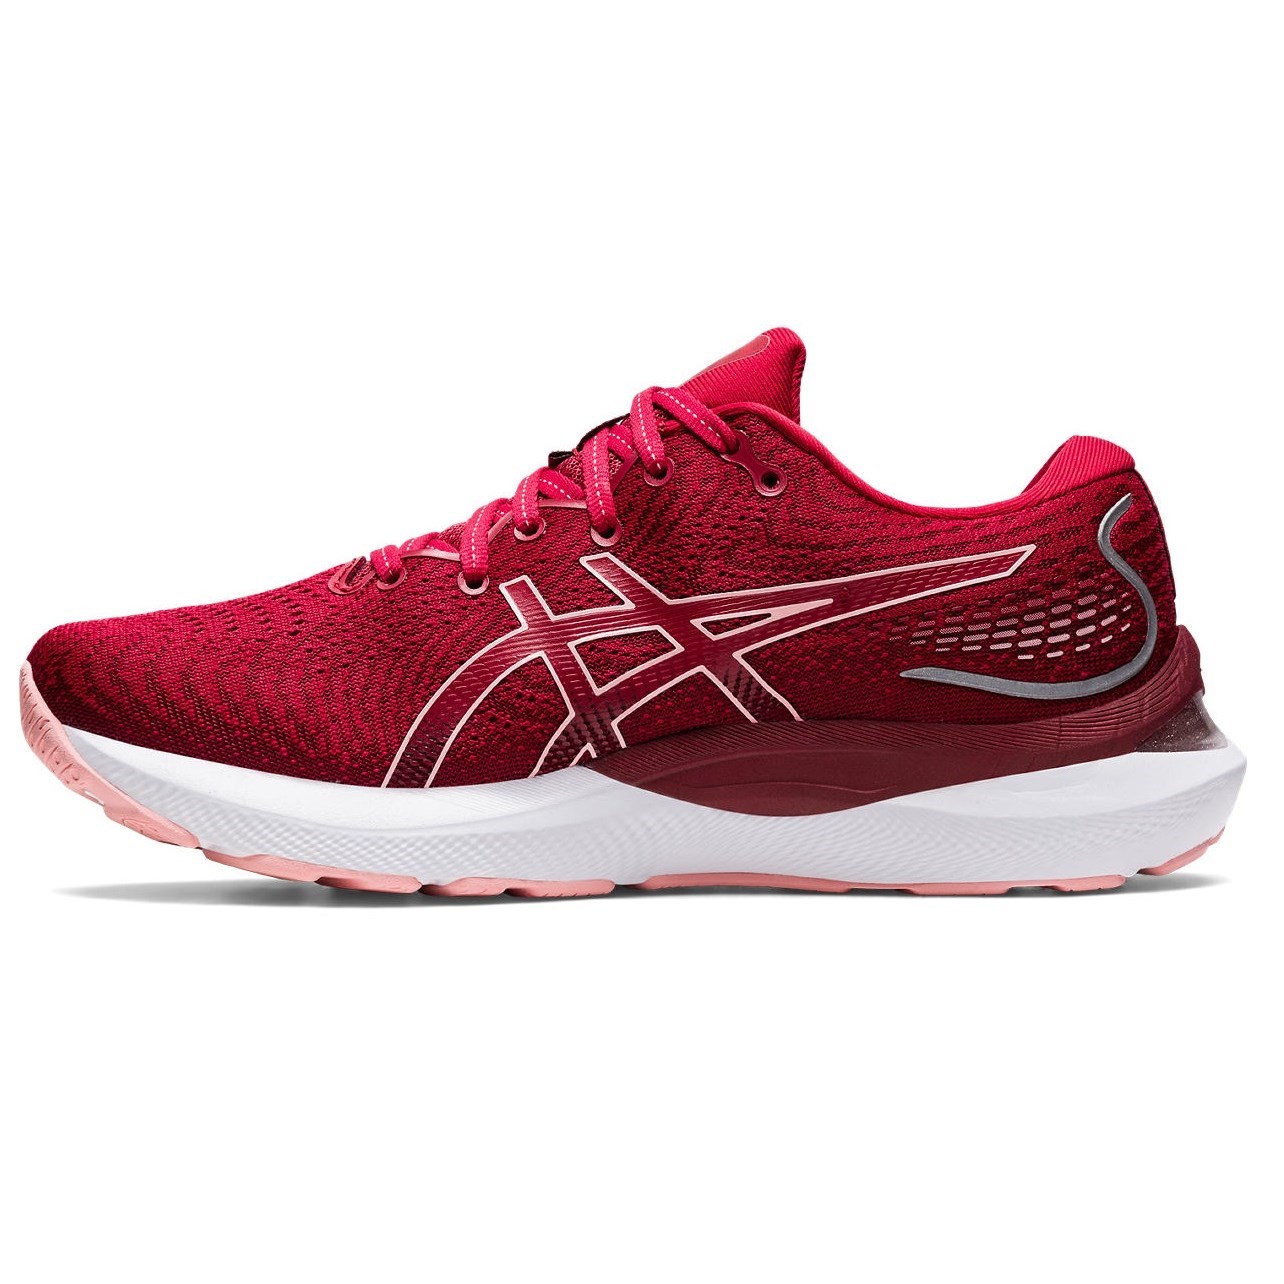 Asics Gel Cumulus 24 - Womens Running Shoes - Cranberry/Frosted Rose ...